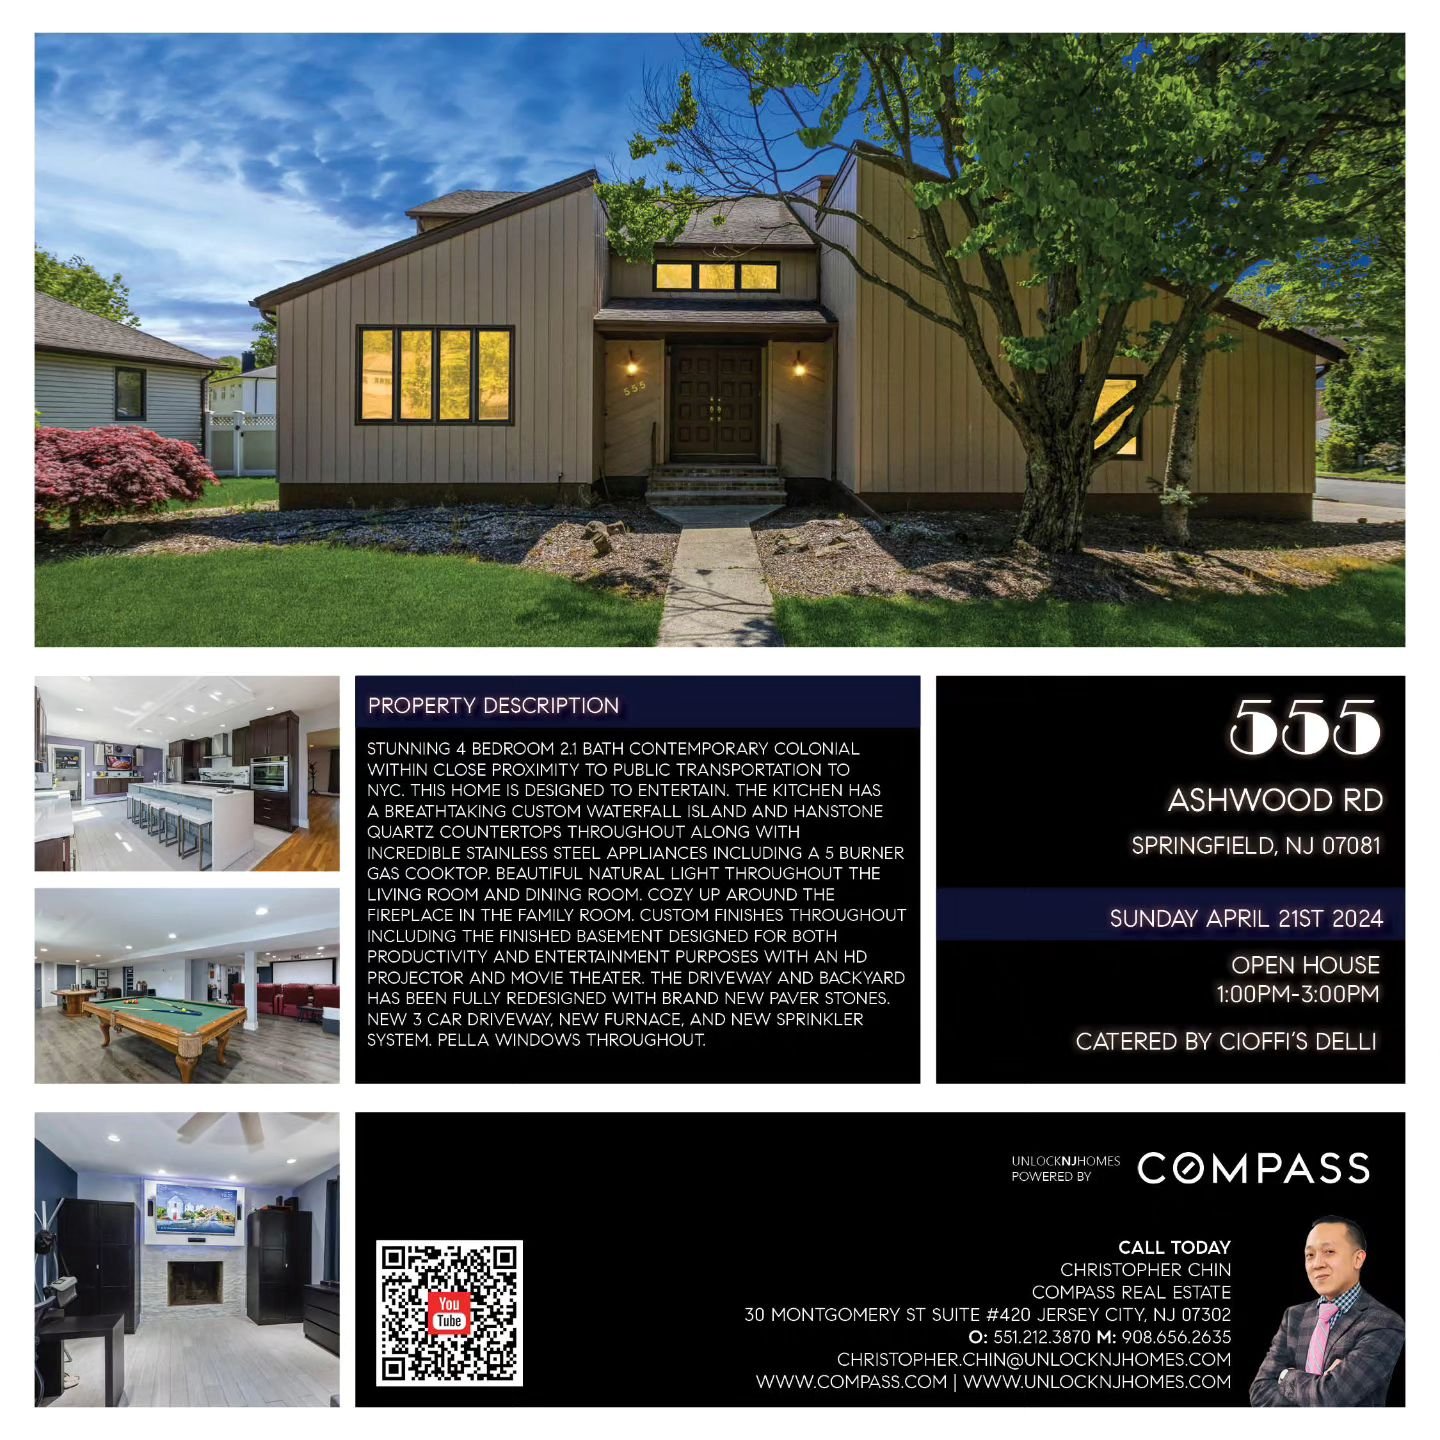 Epic Open House Today
555 Ashwood Road Springfield, NJ 07081
Today April 21st 2024 1:00PM-3:00PM

I am so excited to be hosting this open house today with fellow Jonathan Dayton High School graduate Anthony Cioffi @anthonycioffi31 who is also a forme